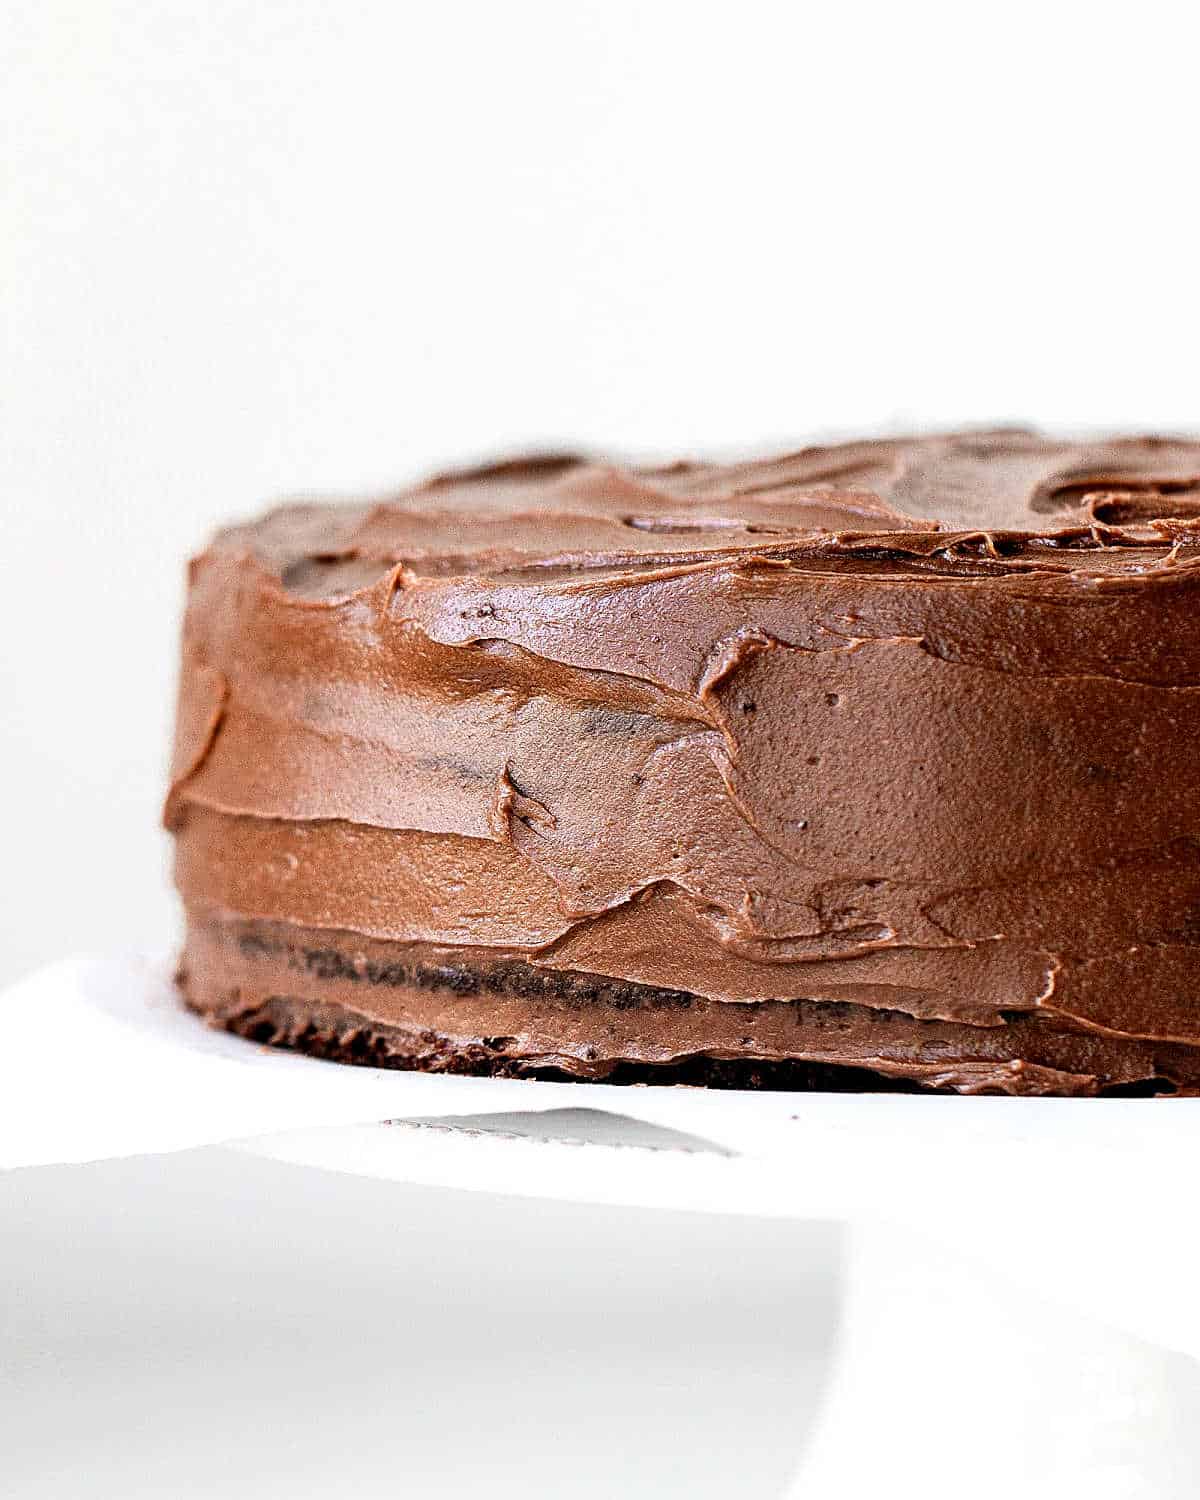 Partial view of frosted chocolate cake on a white cake stand with a white background.